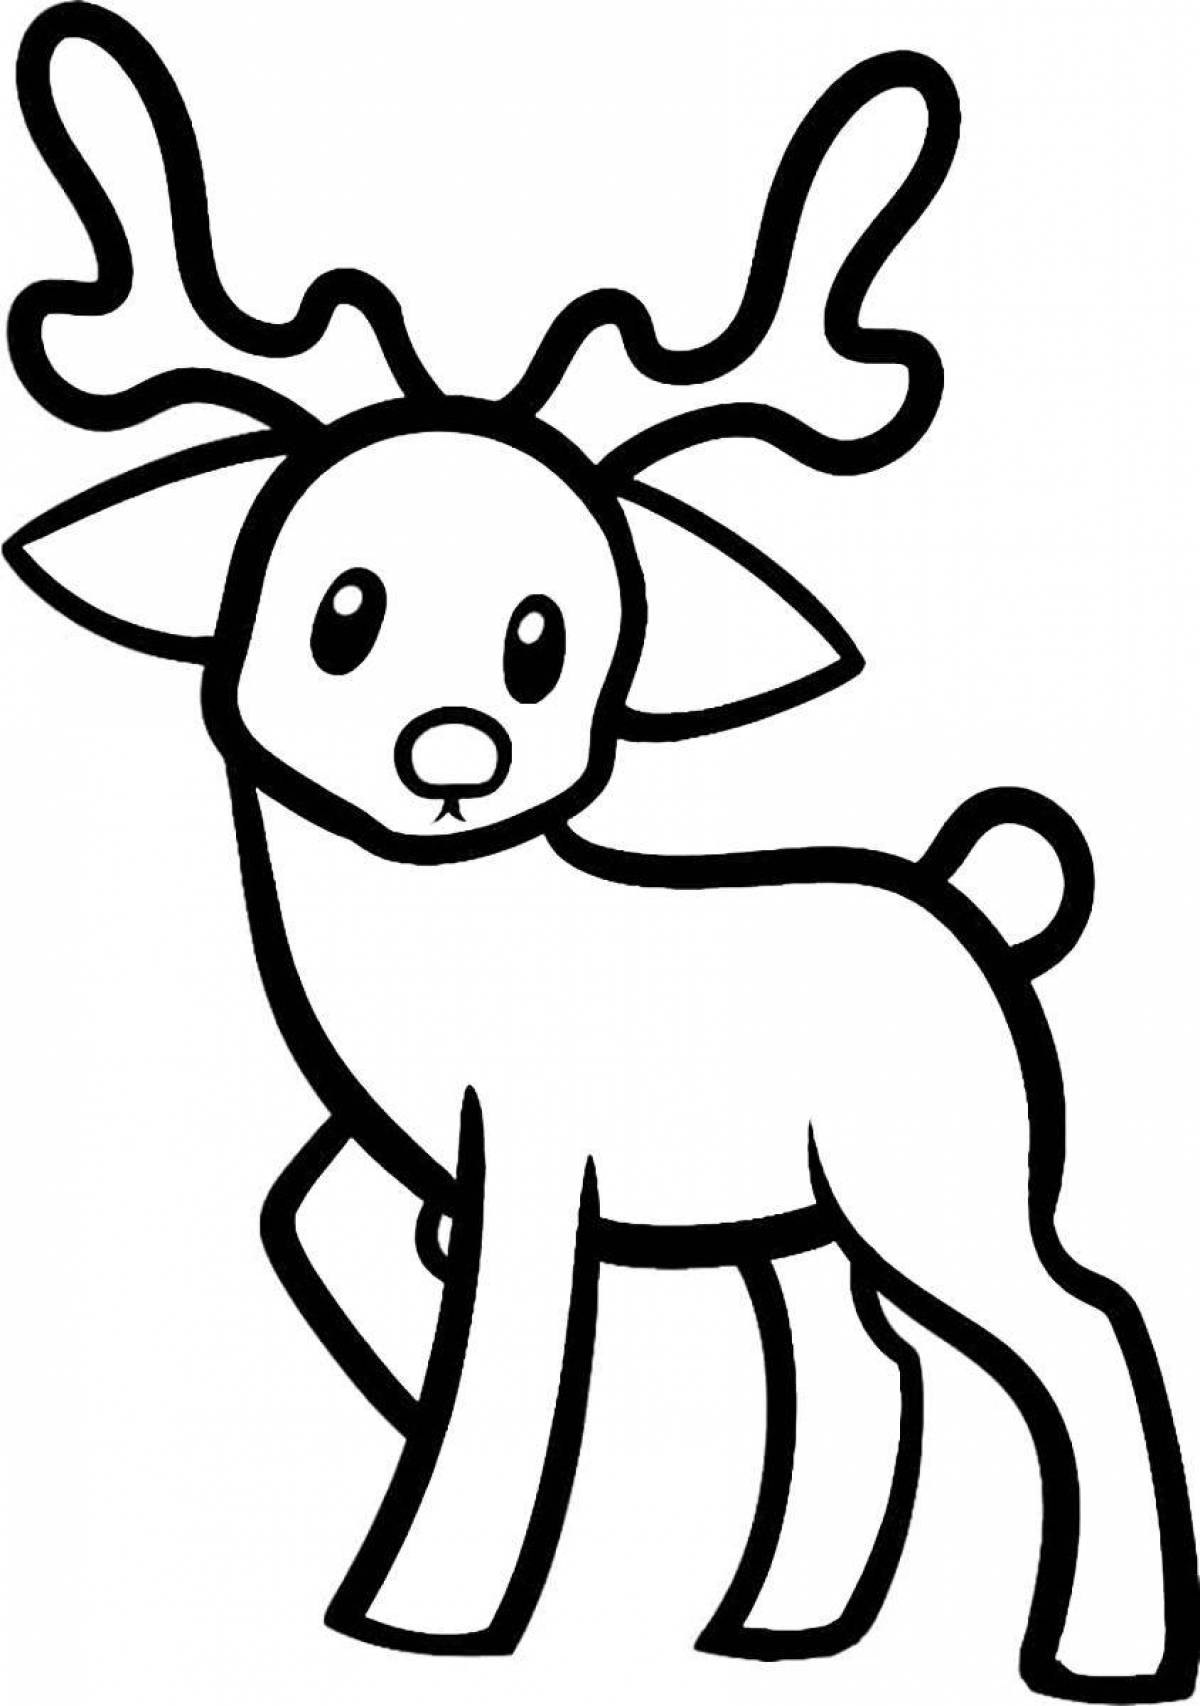 Bright coloring deer for children 3-4 years old